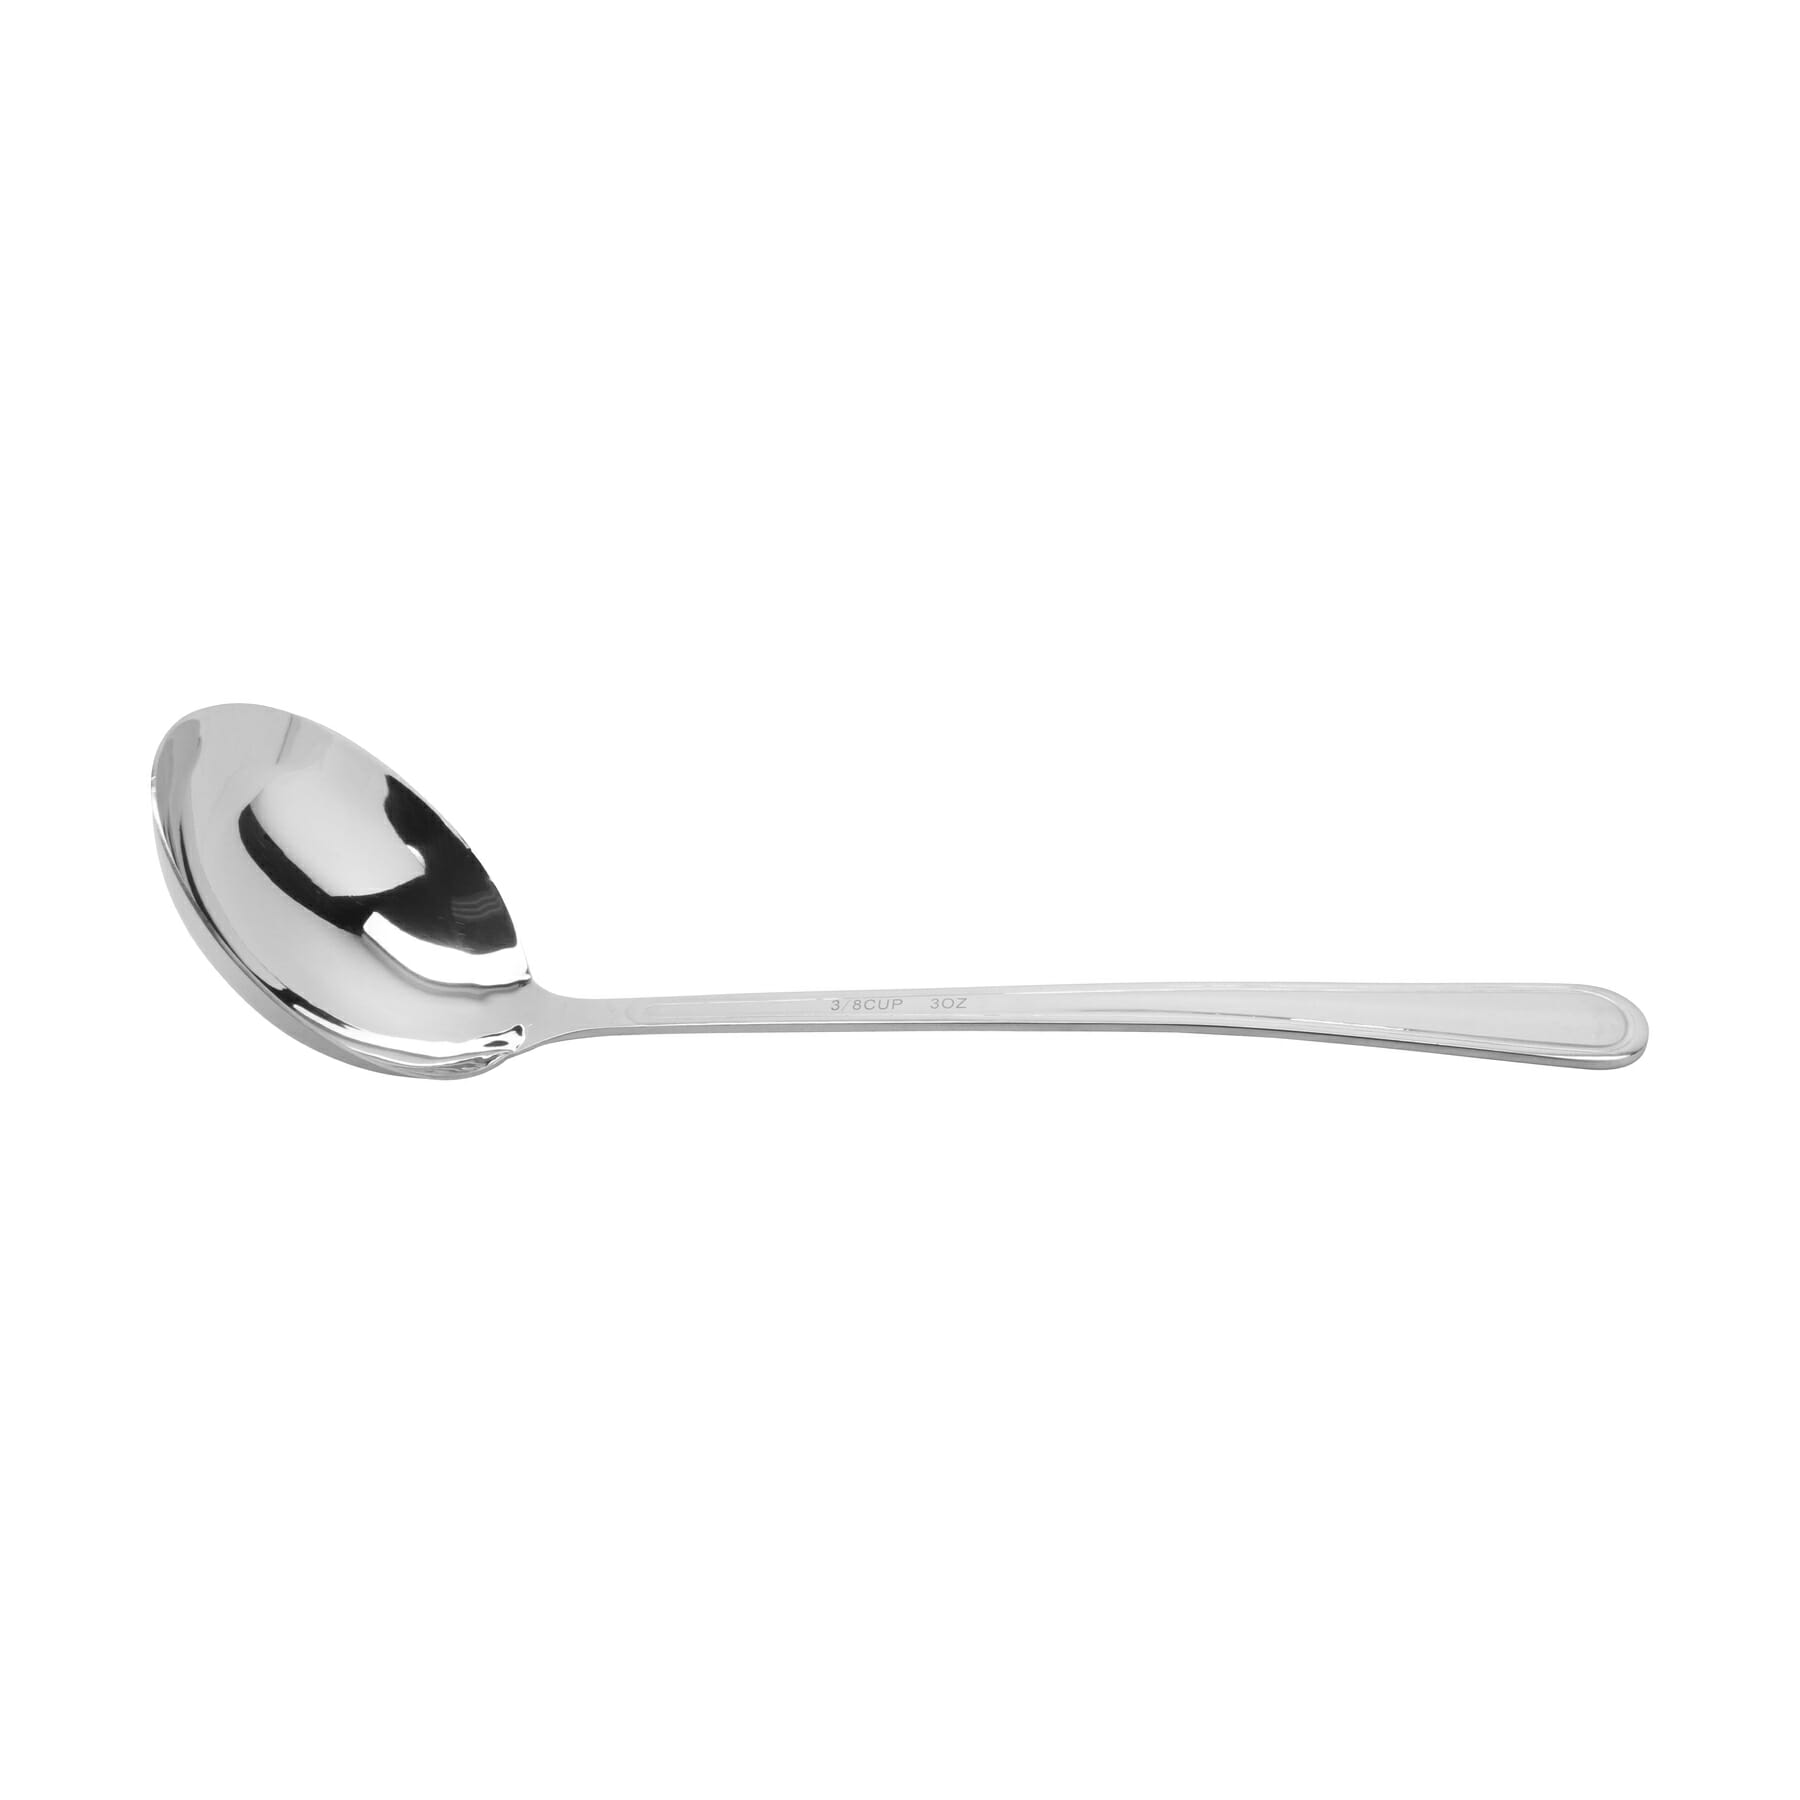 2 oz., 9.5" Stainless Steel Ladle w/ Mirror Finish